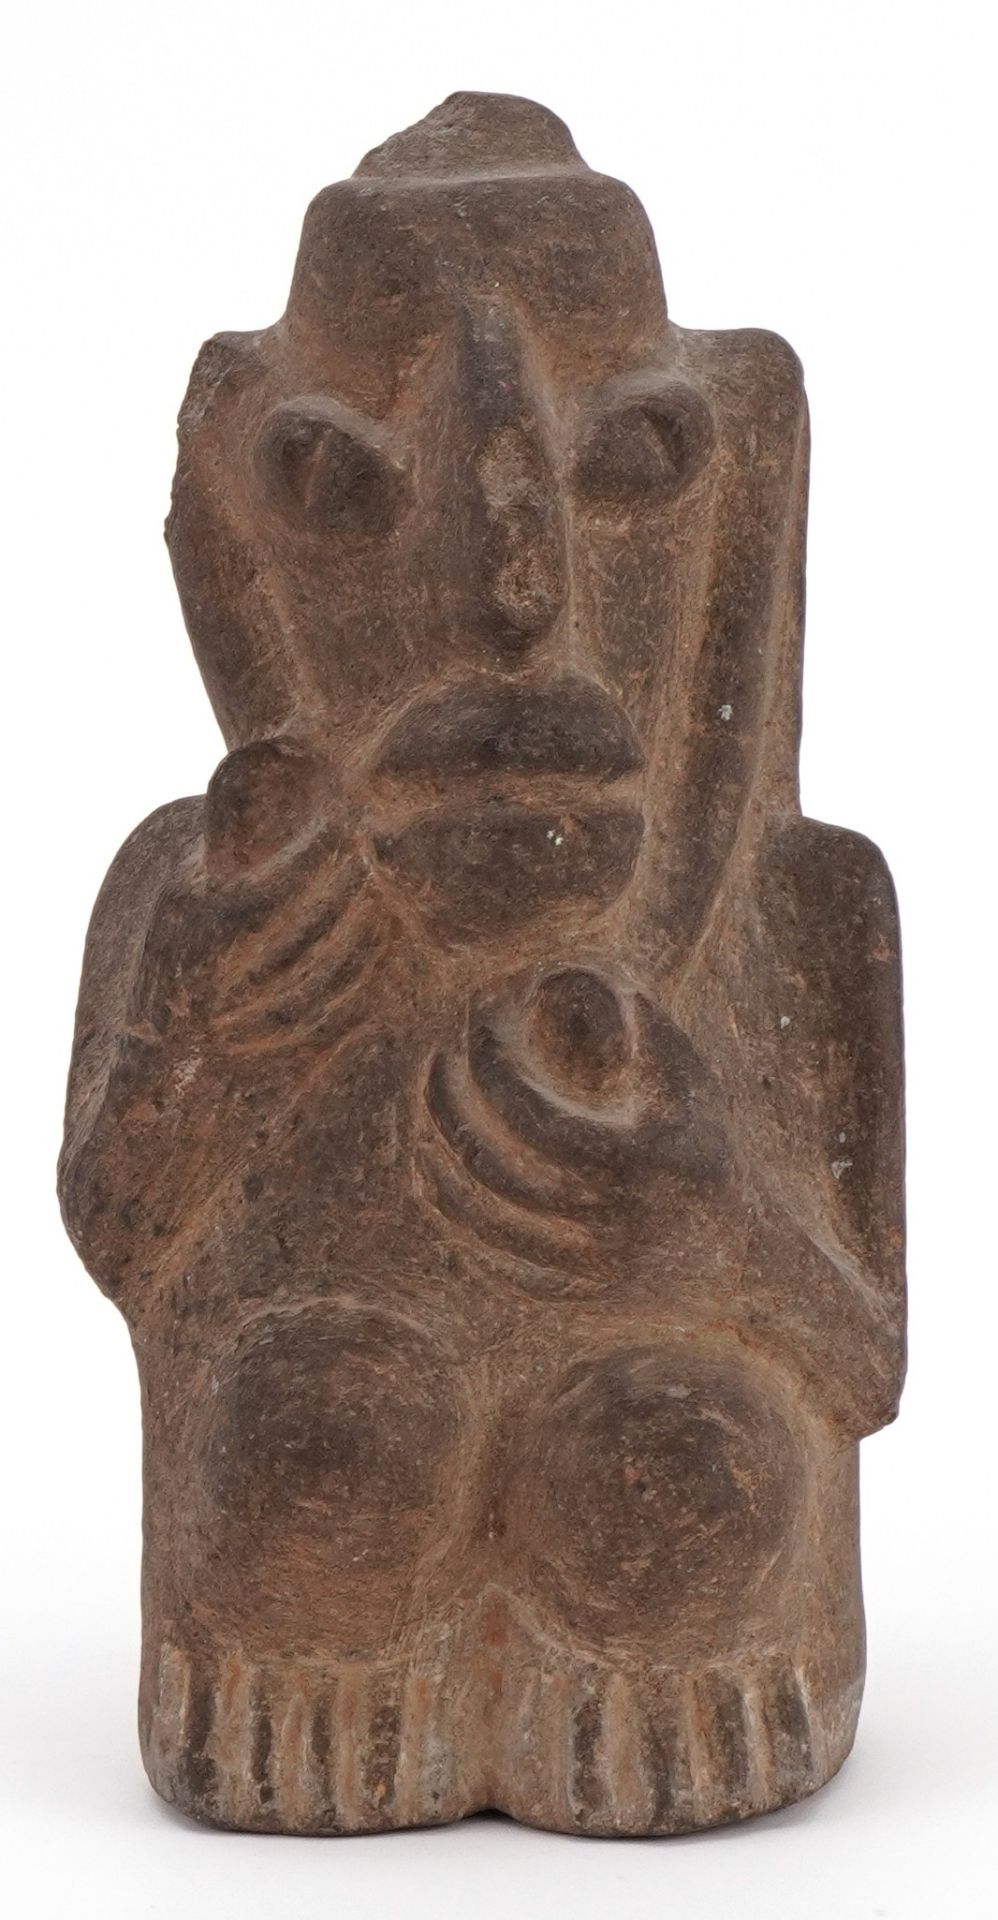 Antique Pre Columbian Aztec carved stone figure of a kneeling nude male, possibly volcanic stone, - Image 2 of 4